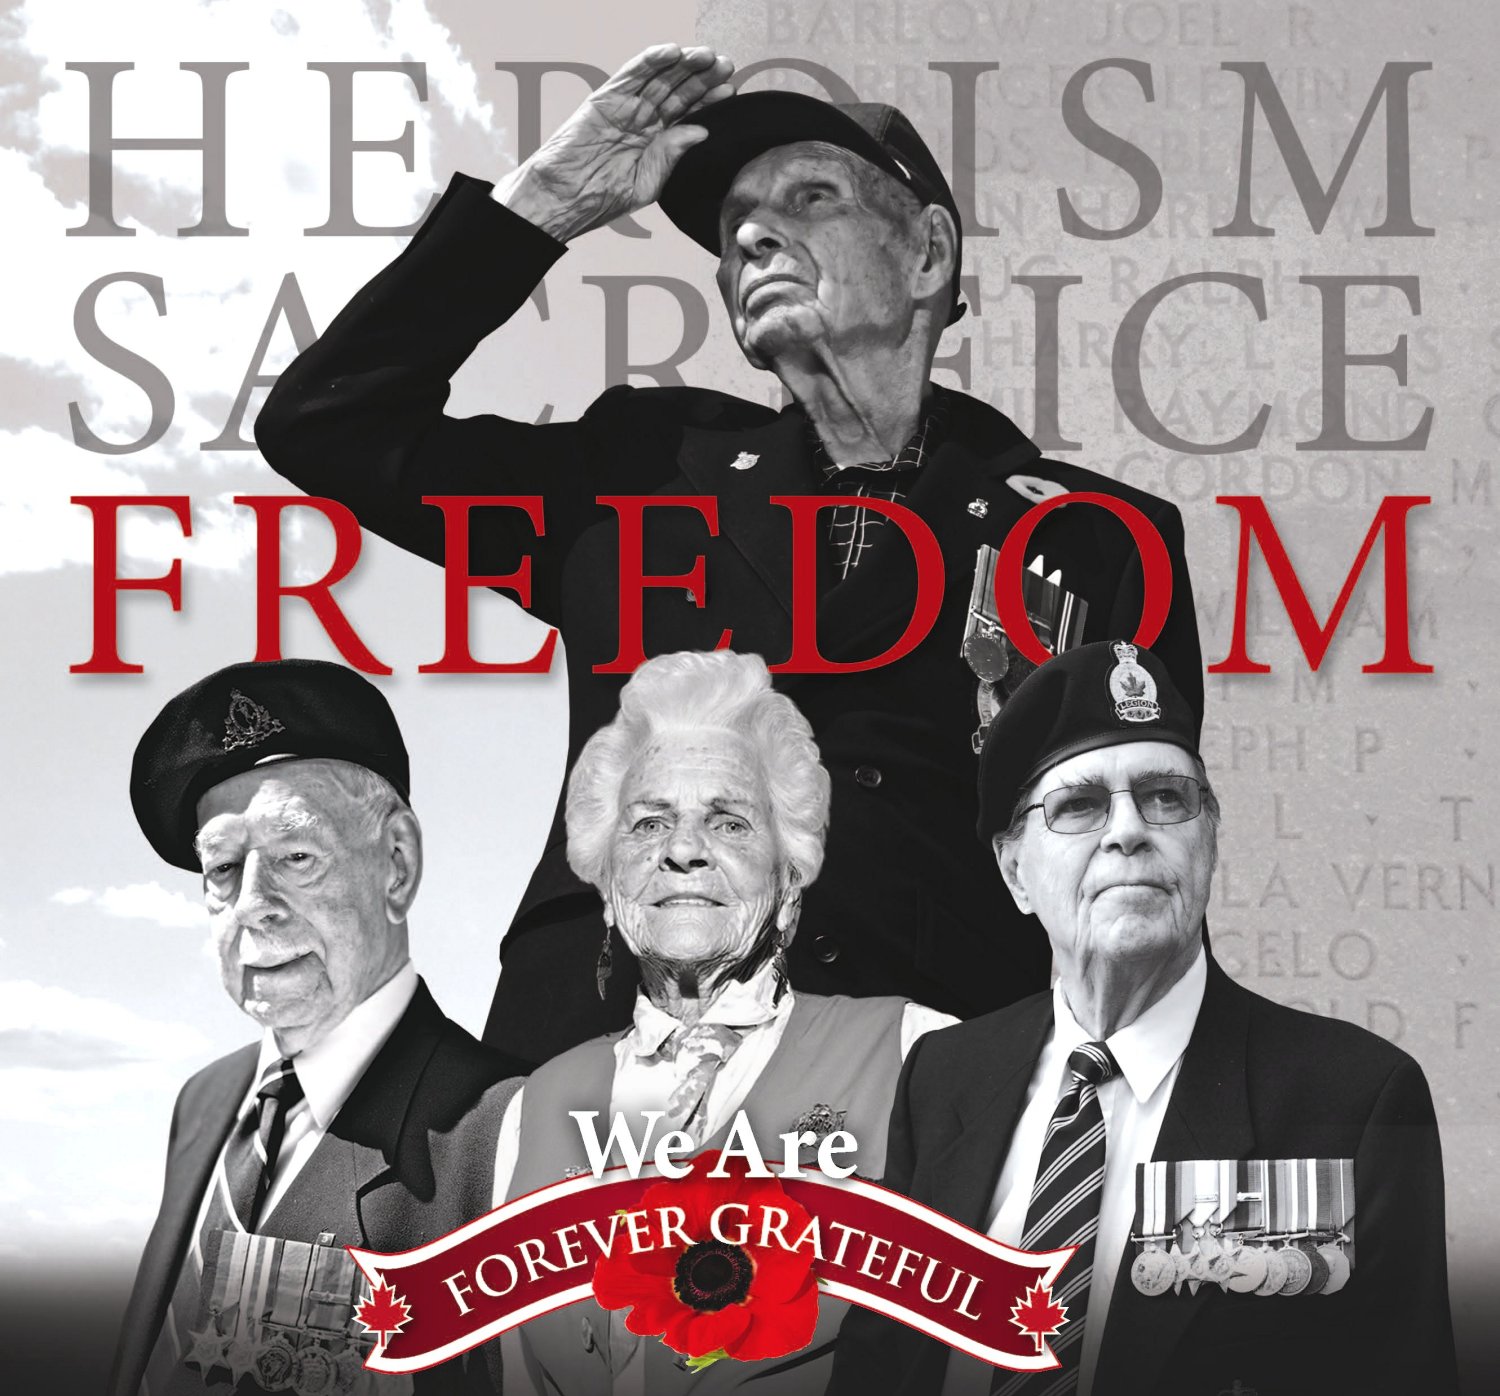 Heroism, Sacrifice, Freedom - We Are Forever Grateful image from Chartwell Remembrance Day Flyer 12Oct11